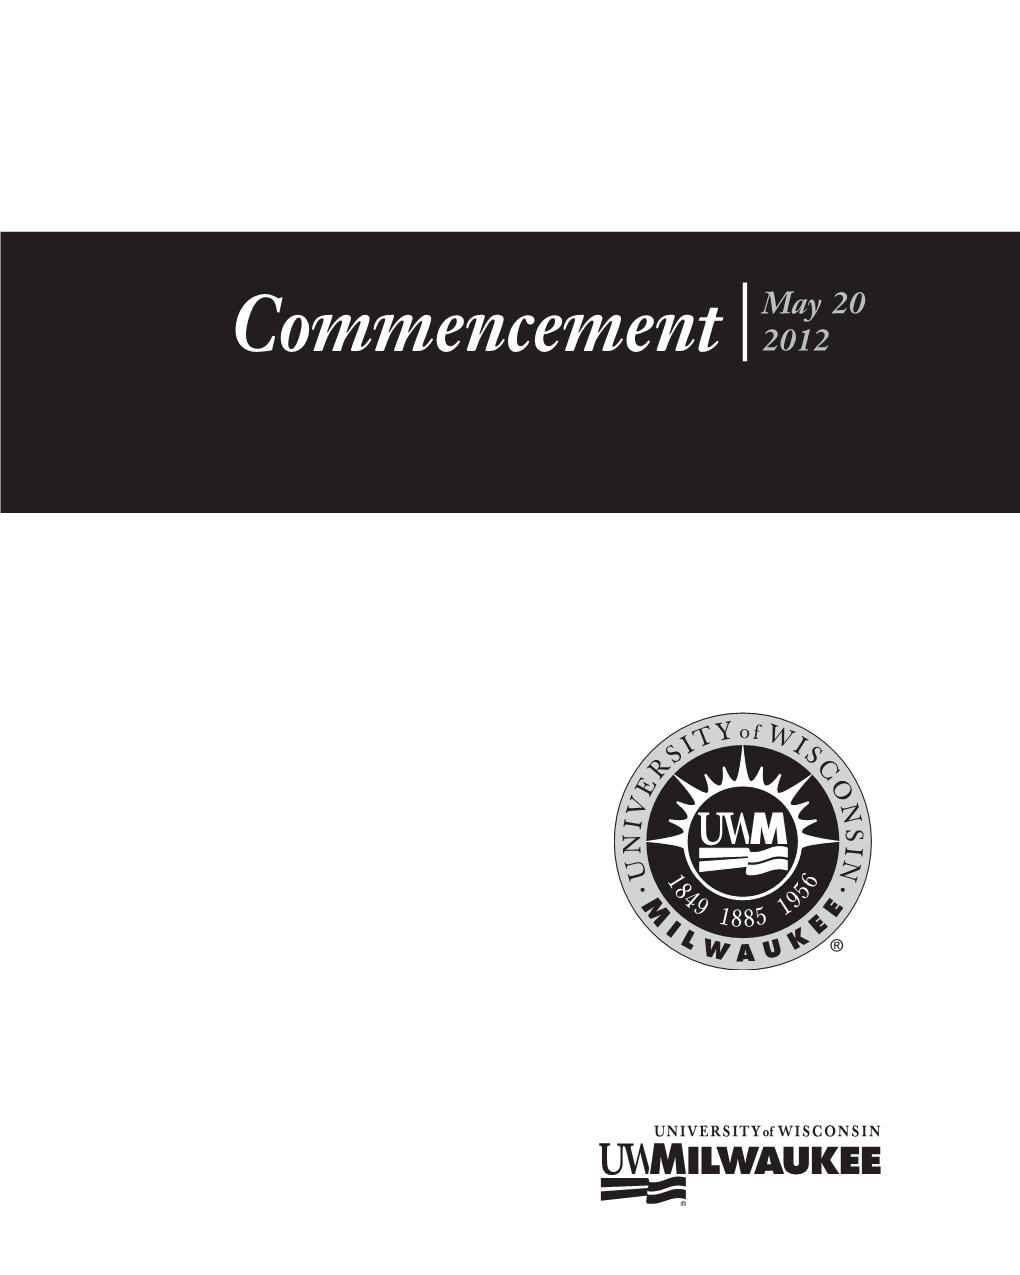 Commencement May 20, 2012